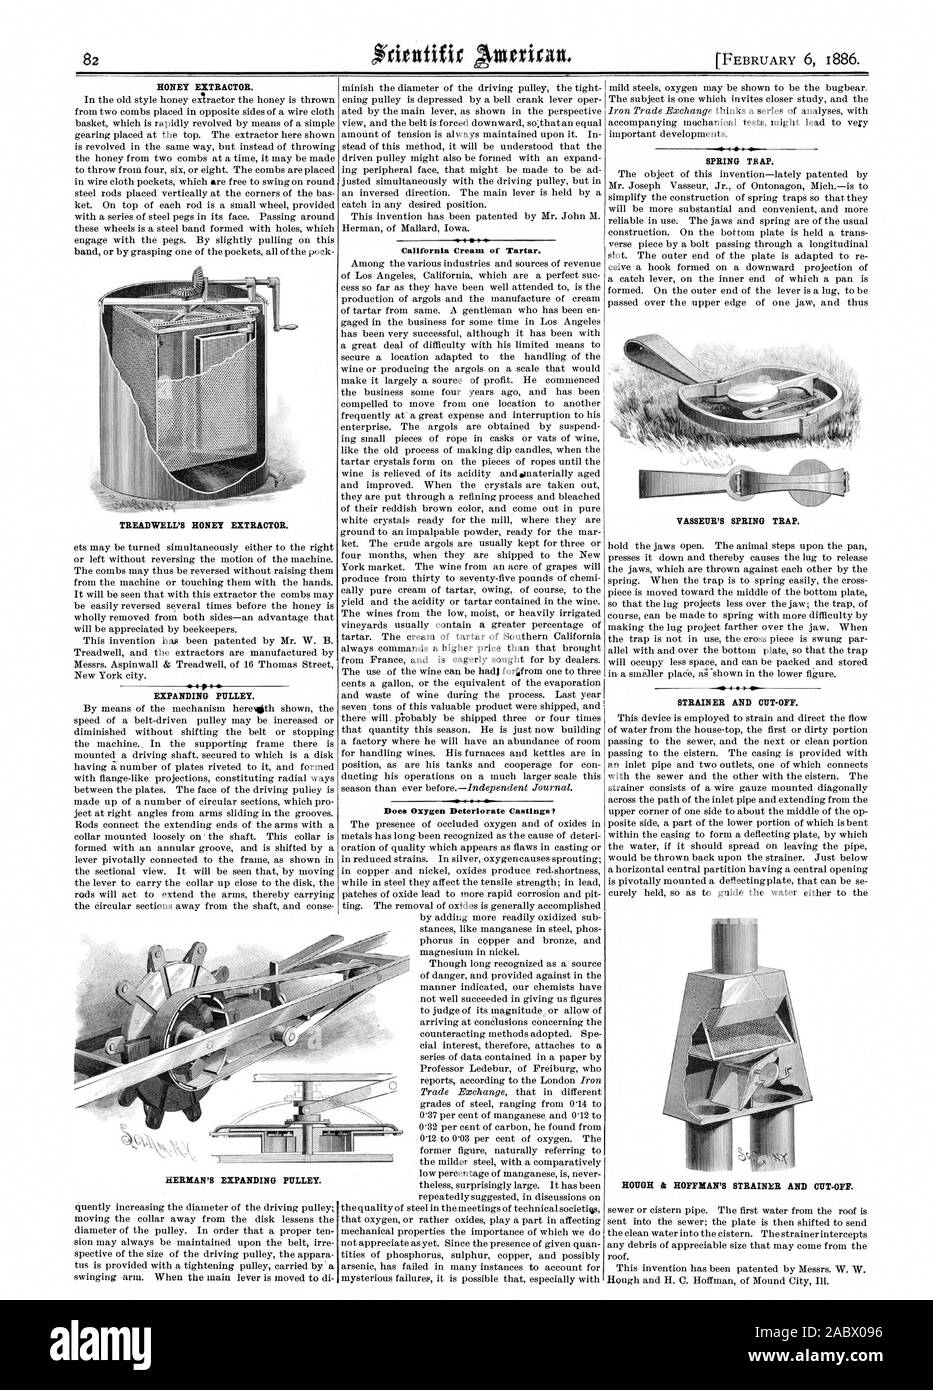 $ritutific wean. HONEY EXTRACTOR. TREADWELL'S HONEY EXTRACTOR. EXPANDING PULLEY. HERMAN'S EXPANDING PULLEY. California Cream of Tartar. Does Oxygen Deteriorate Castings? SPRING TRAP. VASSEUR'S SPRING TRAP.STRAINER AND CUT-OFF., scientific american, 1886-02-06 Stock Photo